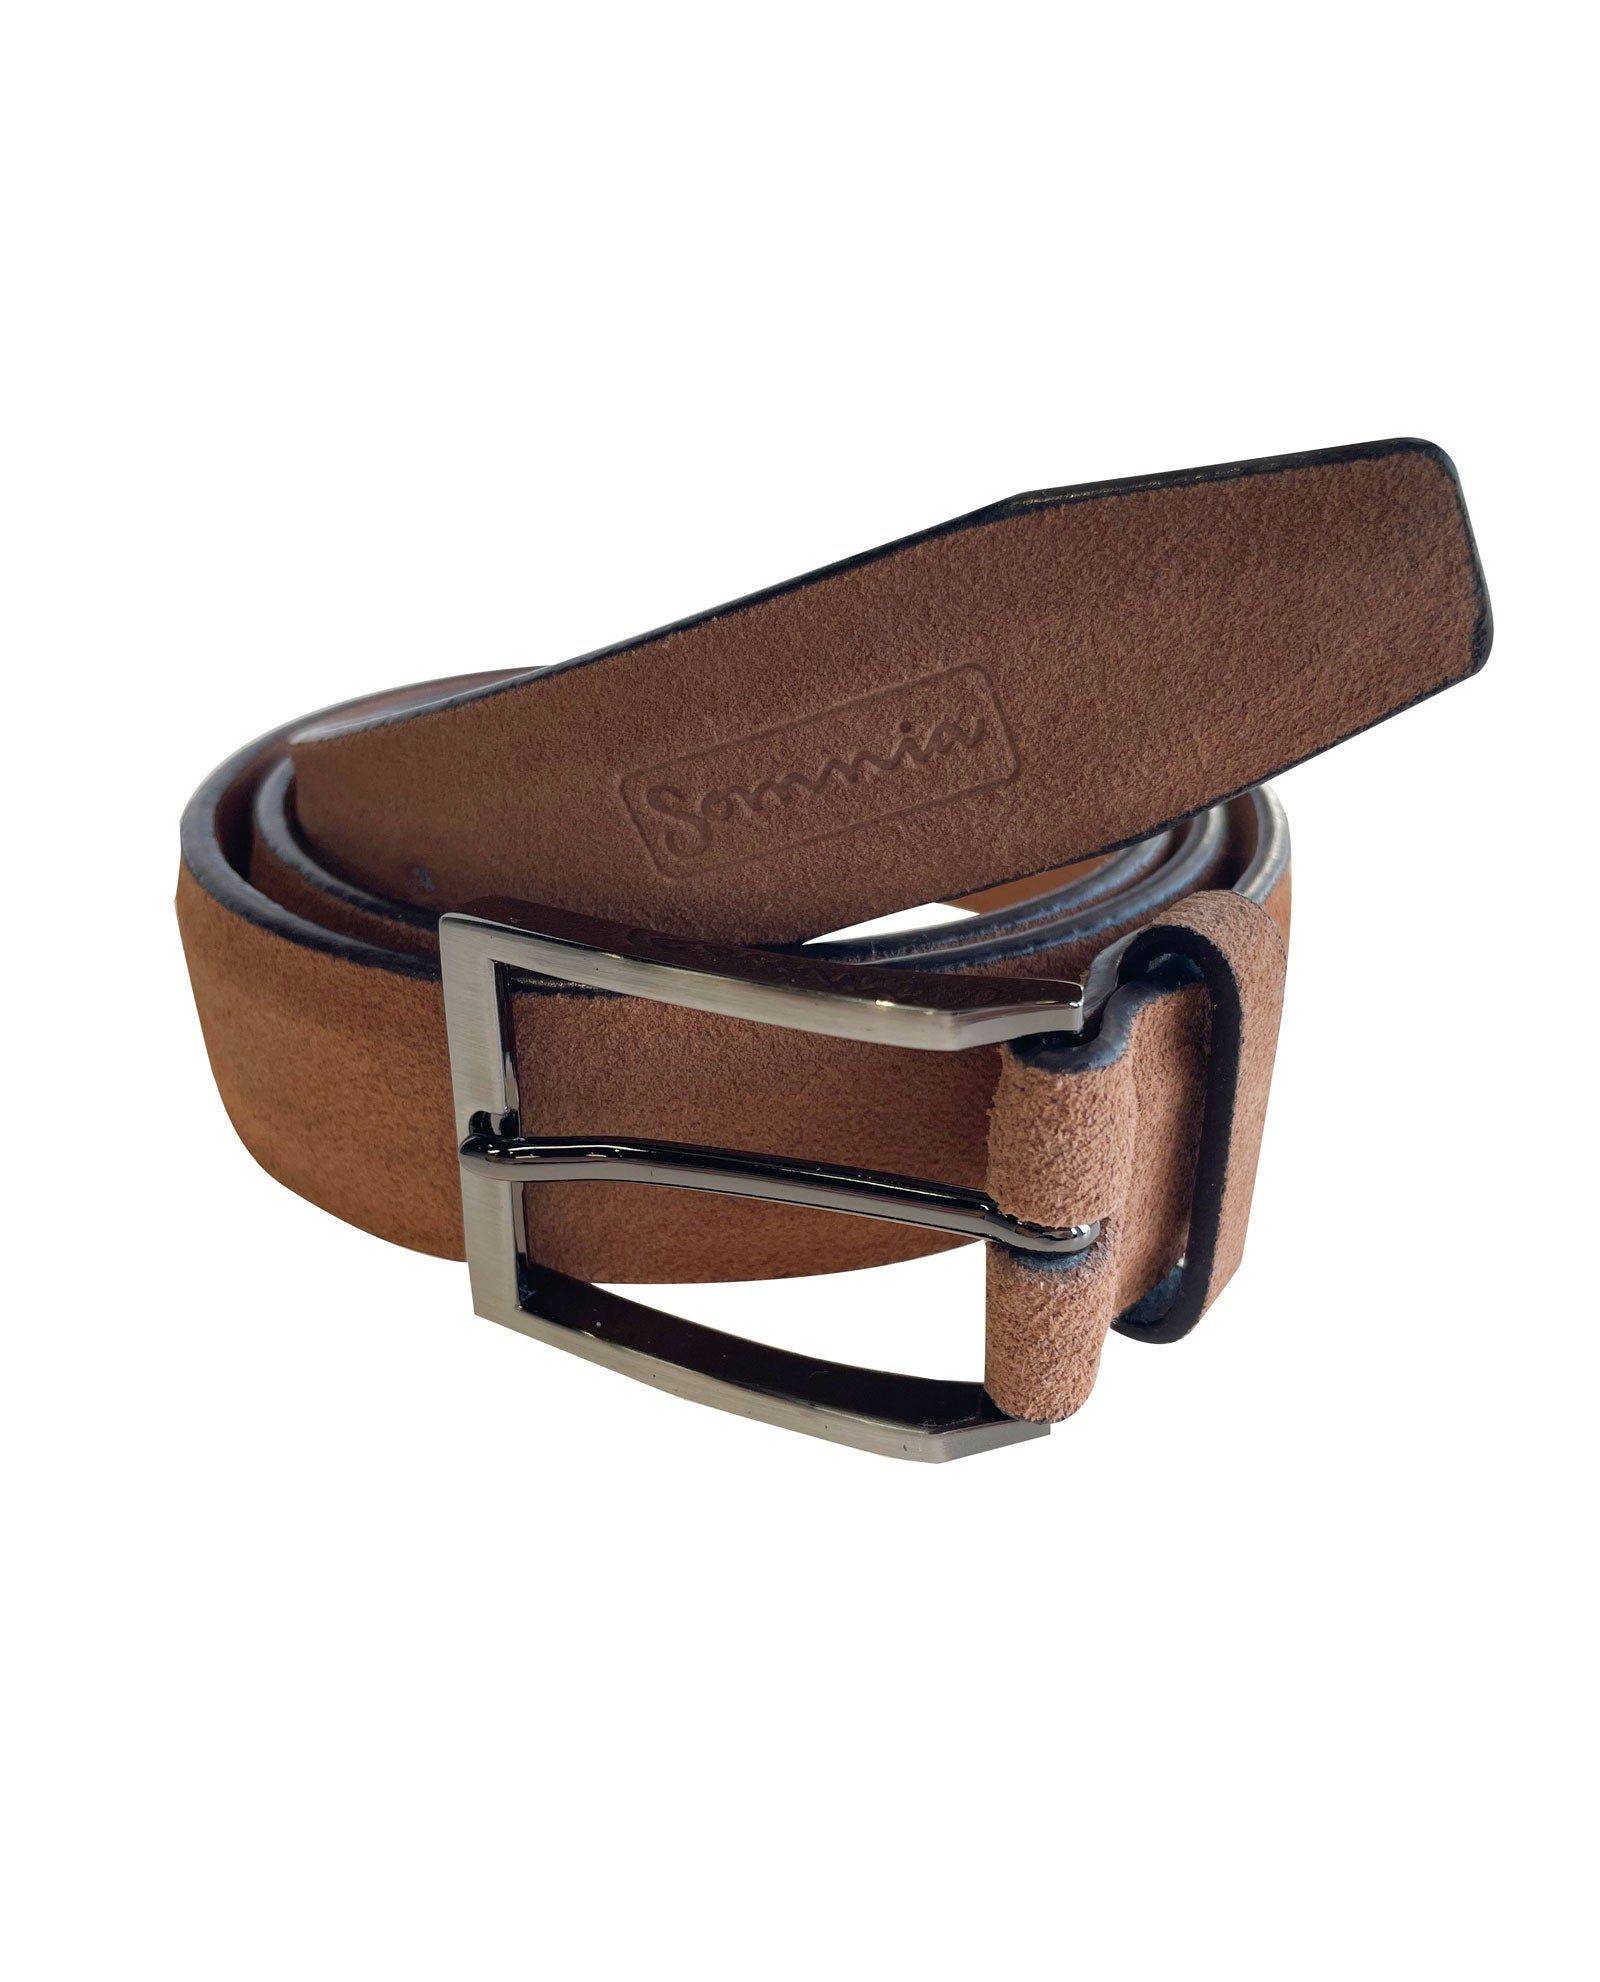 Gold and Suede Leather Belt